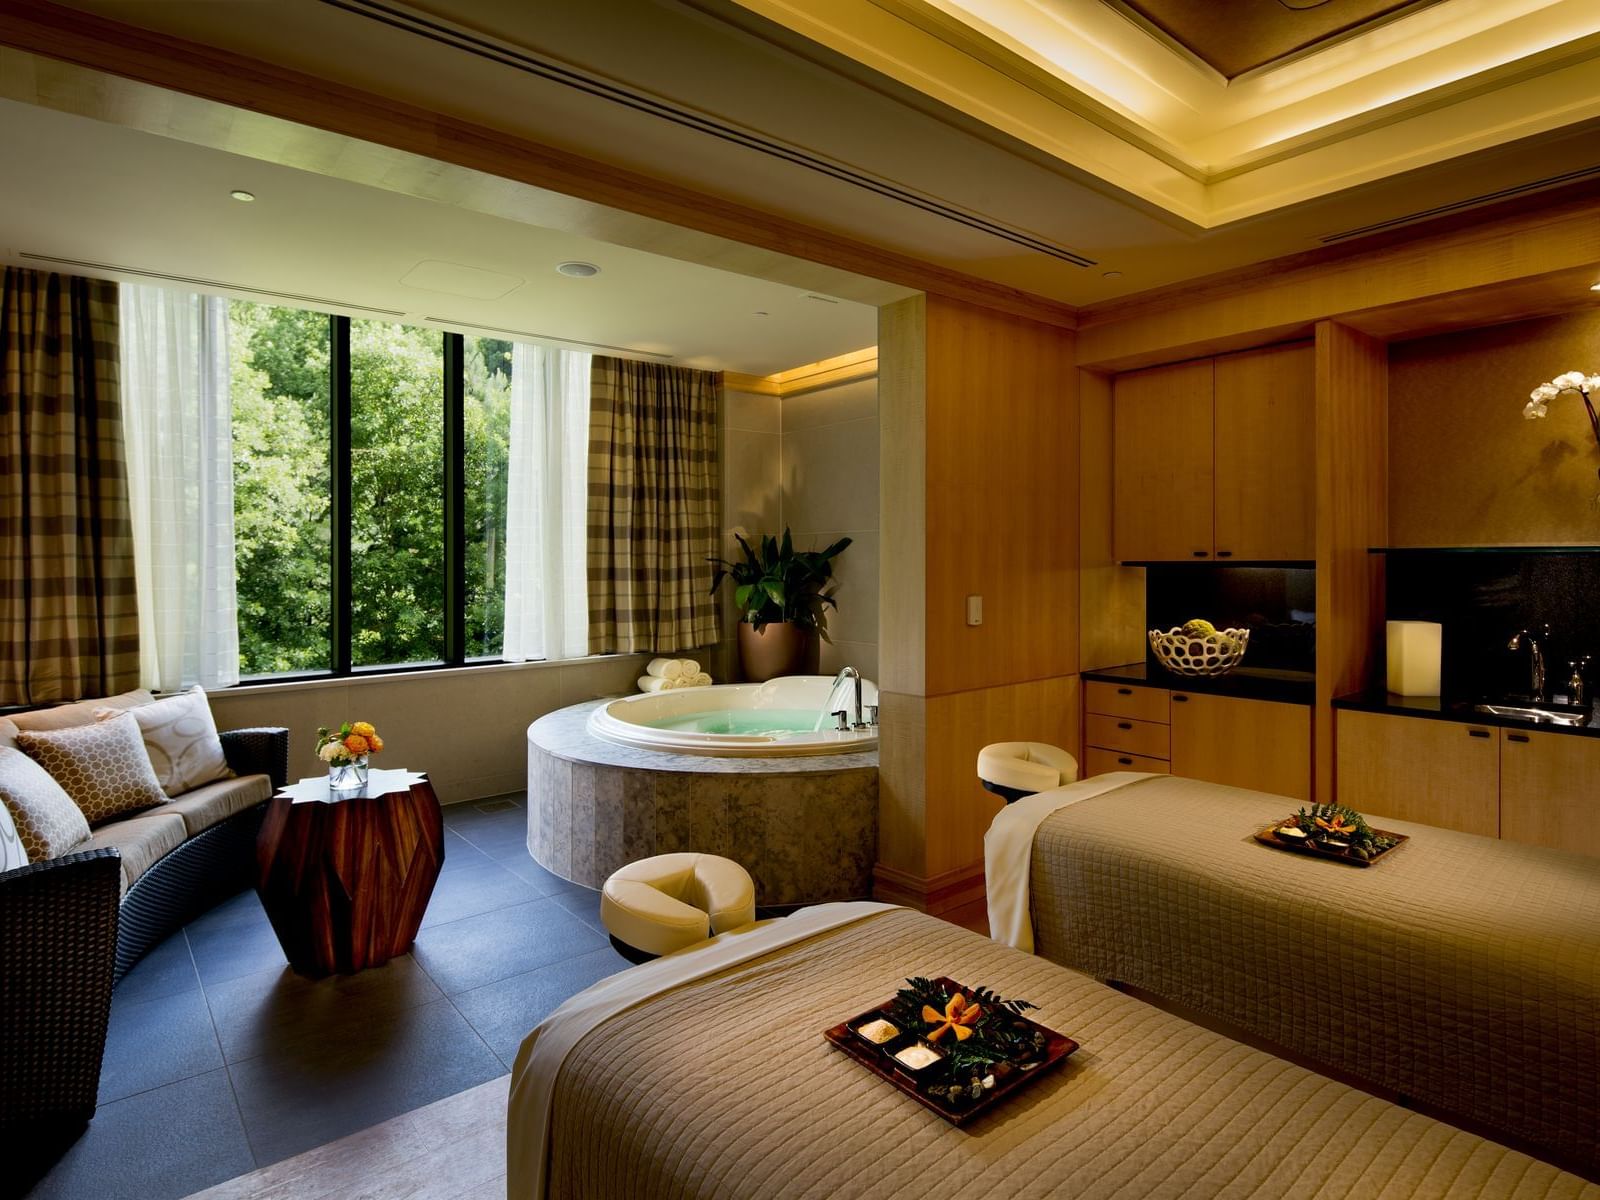 Relaxing massage beds, lounge area & jacuzzi in The Spa treatment room at The Umstead Hotel and Spa